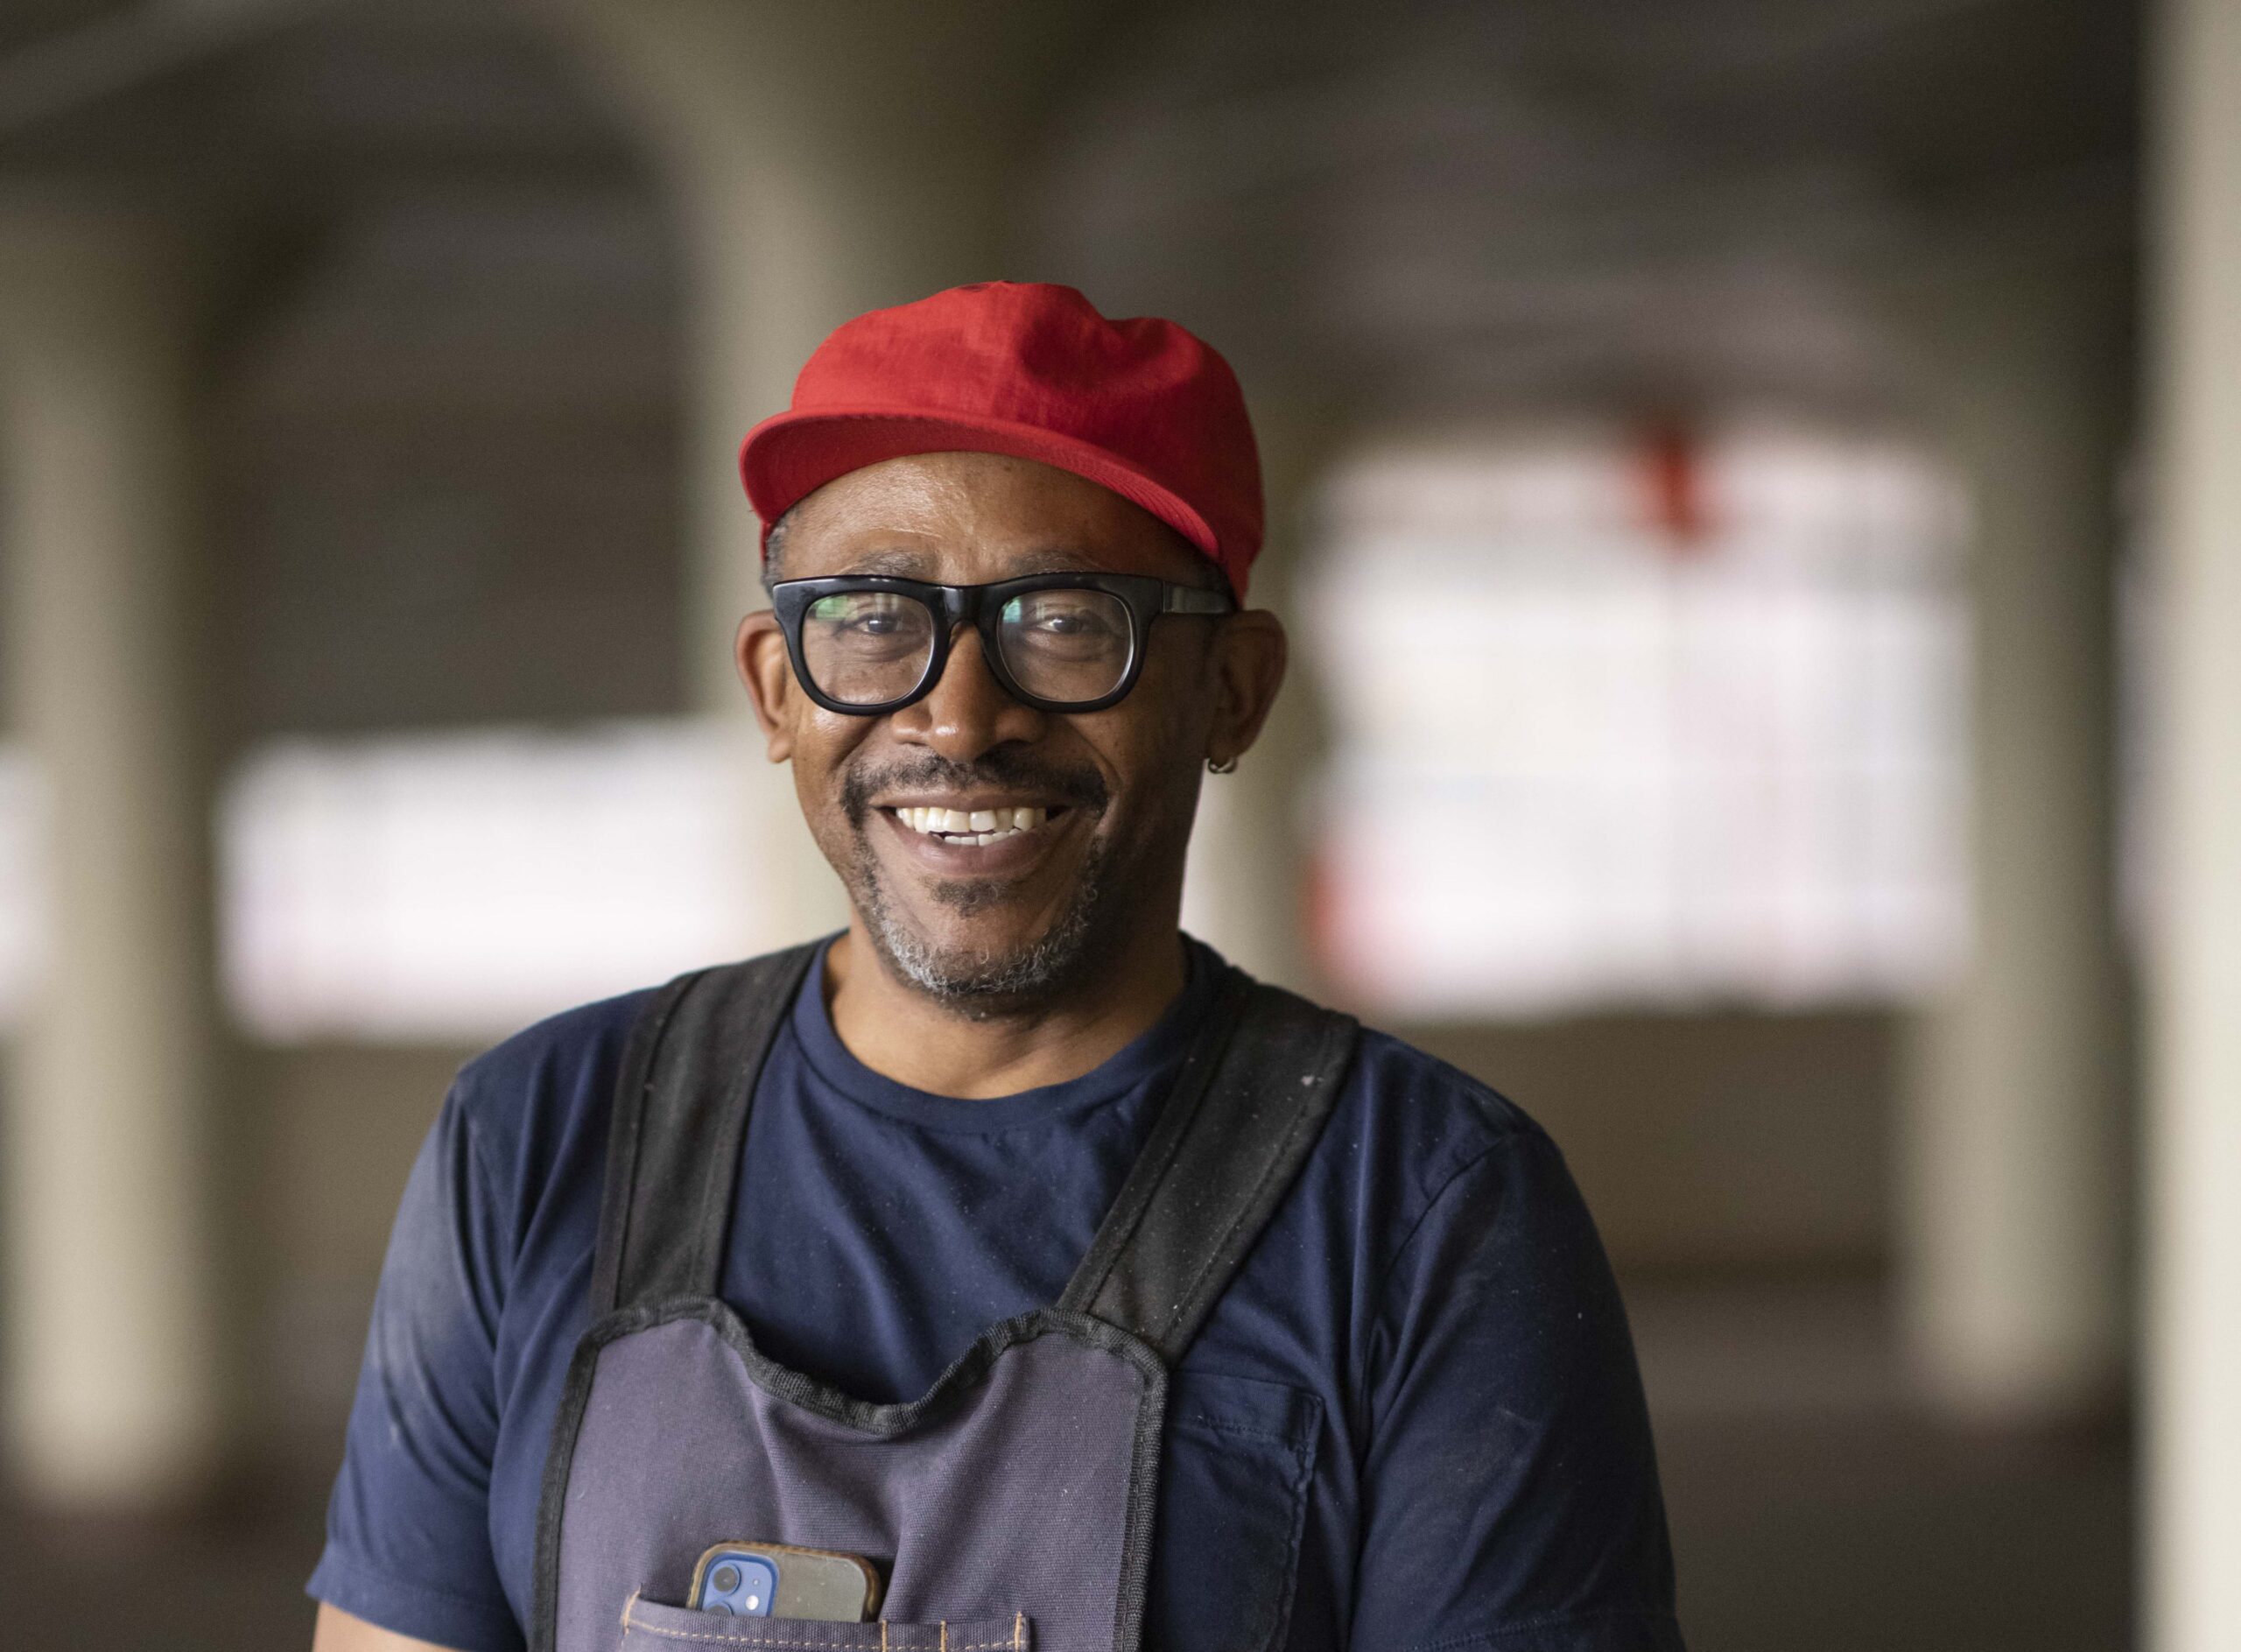 Portrait of Norman Teague wearing a red hat, glasses, blue t-shirt, and apron.